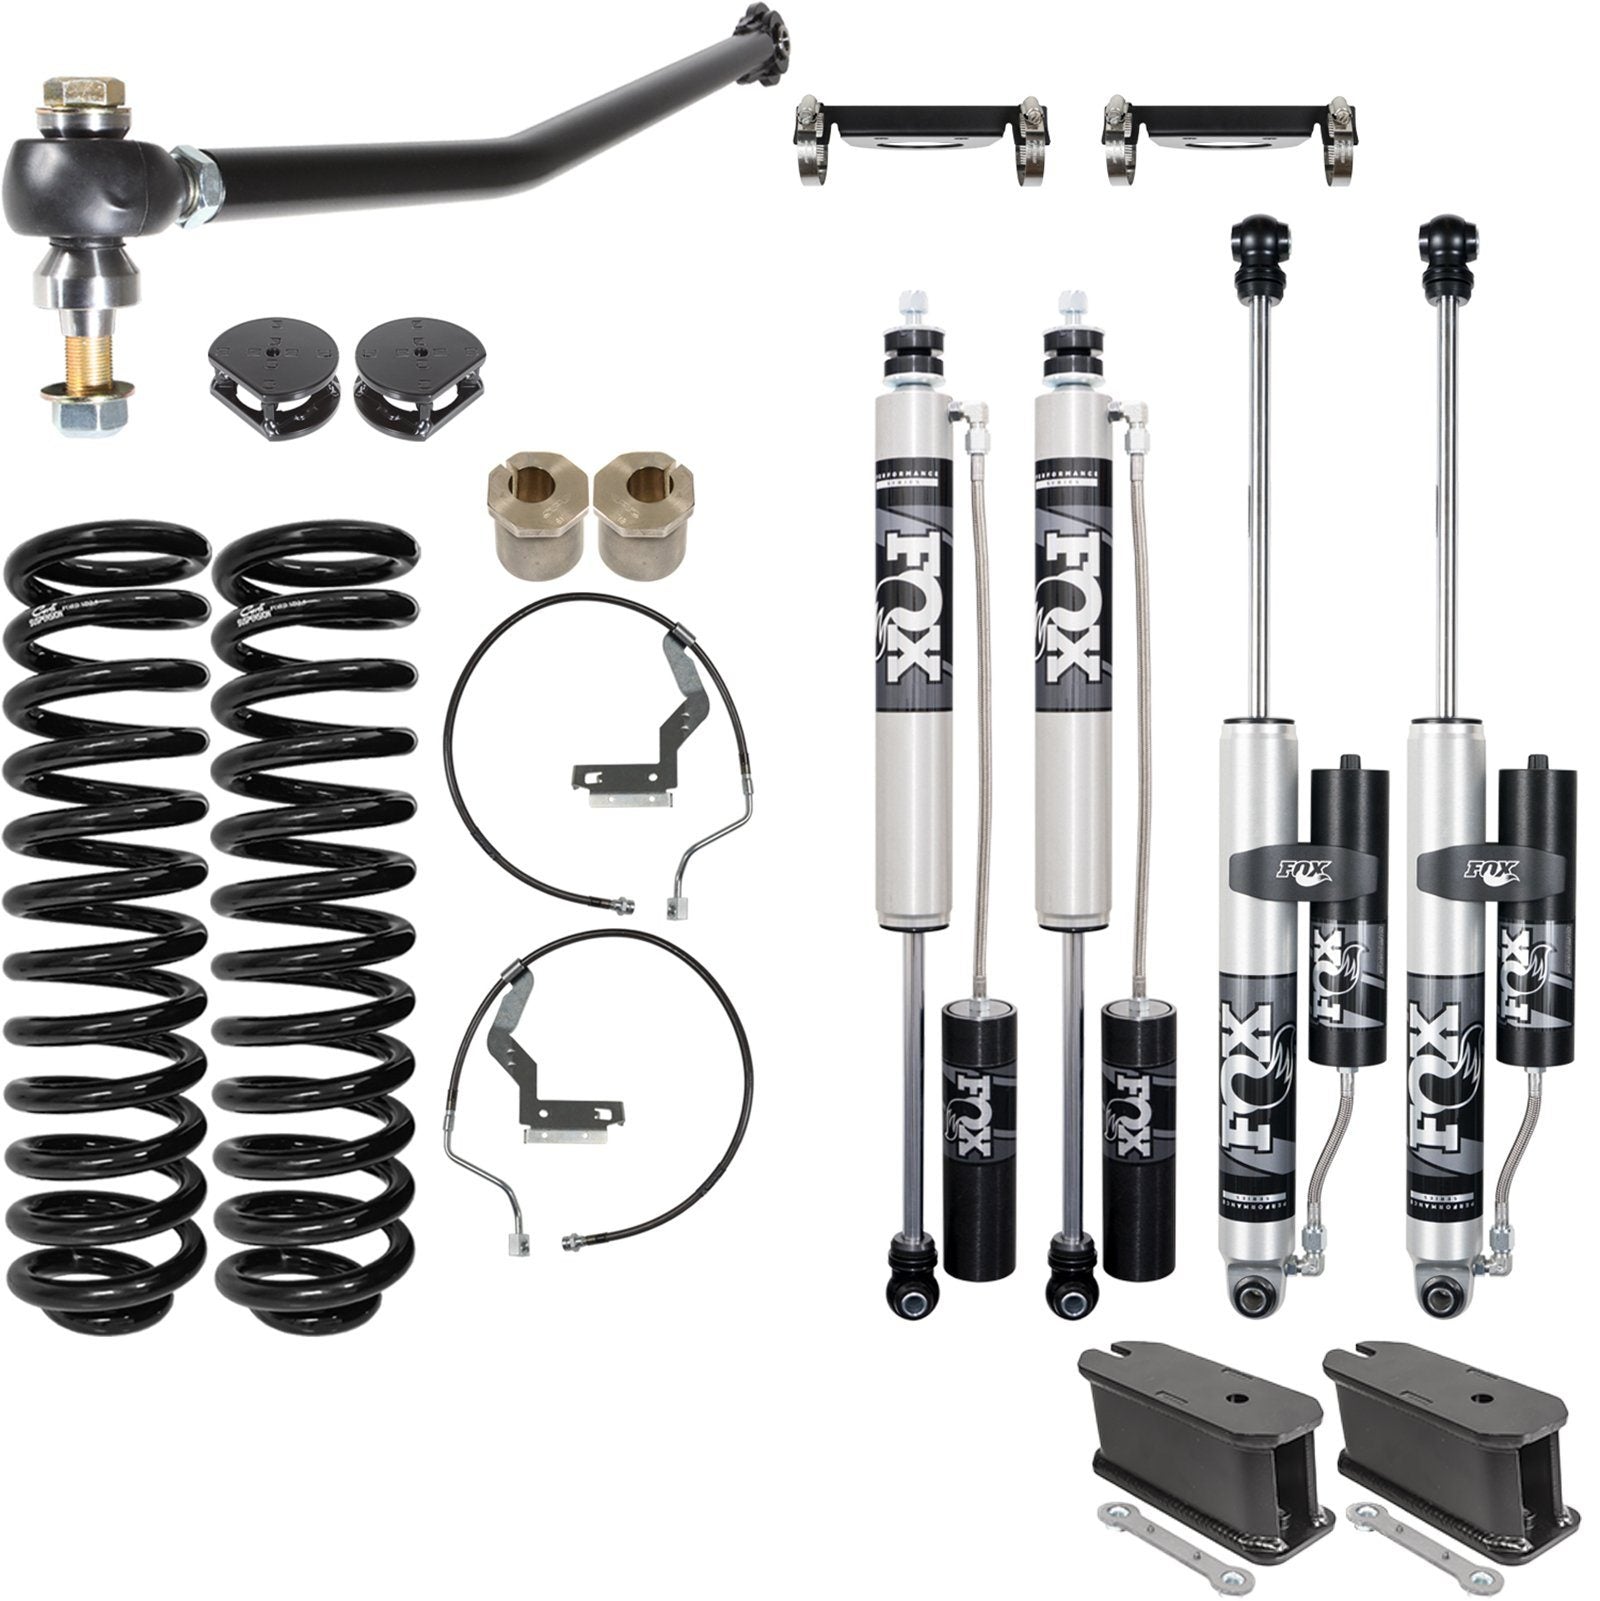 '17-23 Ford F250/350 6.2/7.3L Gas 2.0 Backcountry System Suspension Carli Suspension parts